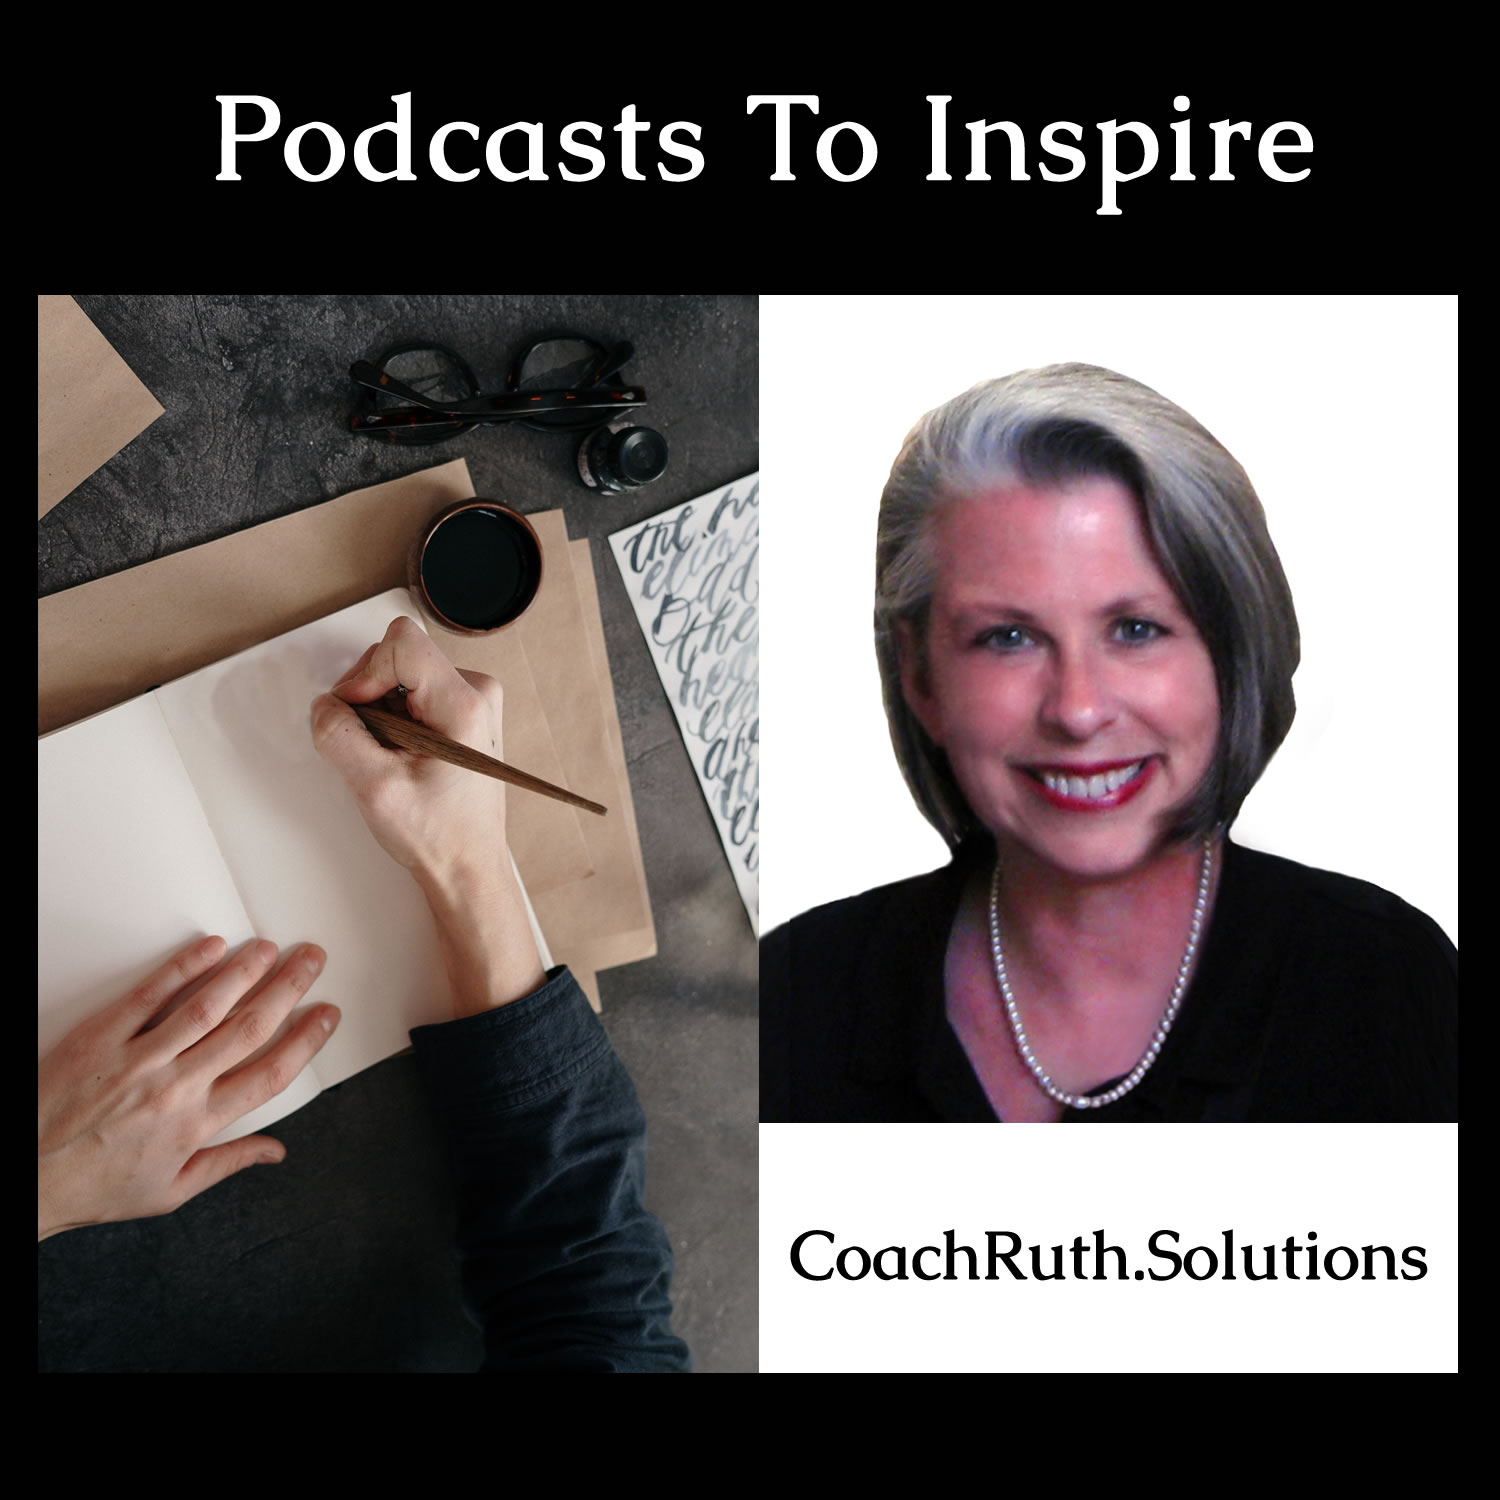 Coach Ruth using her voice on Anchor in Podcasting